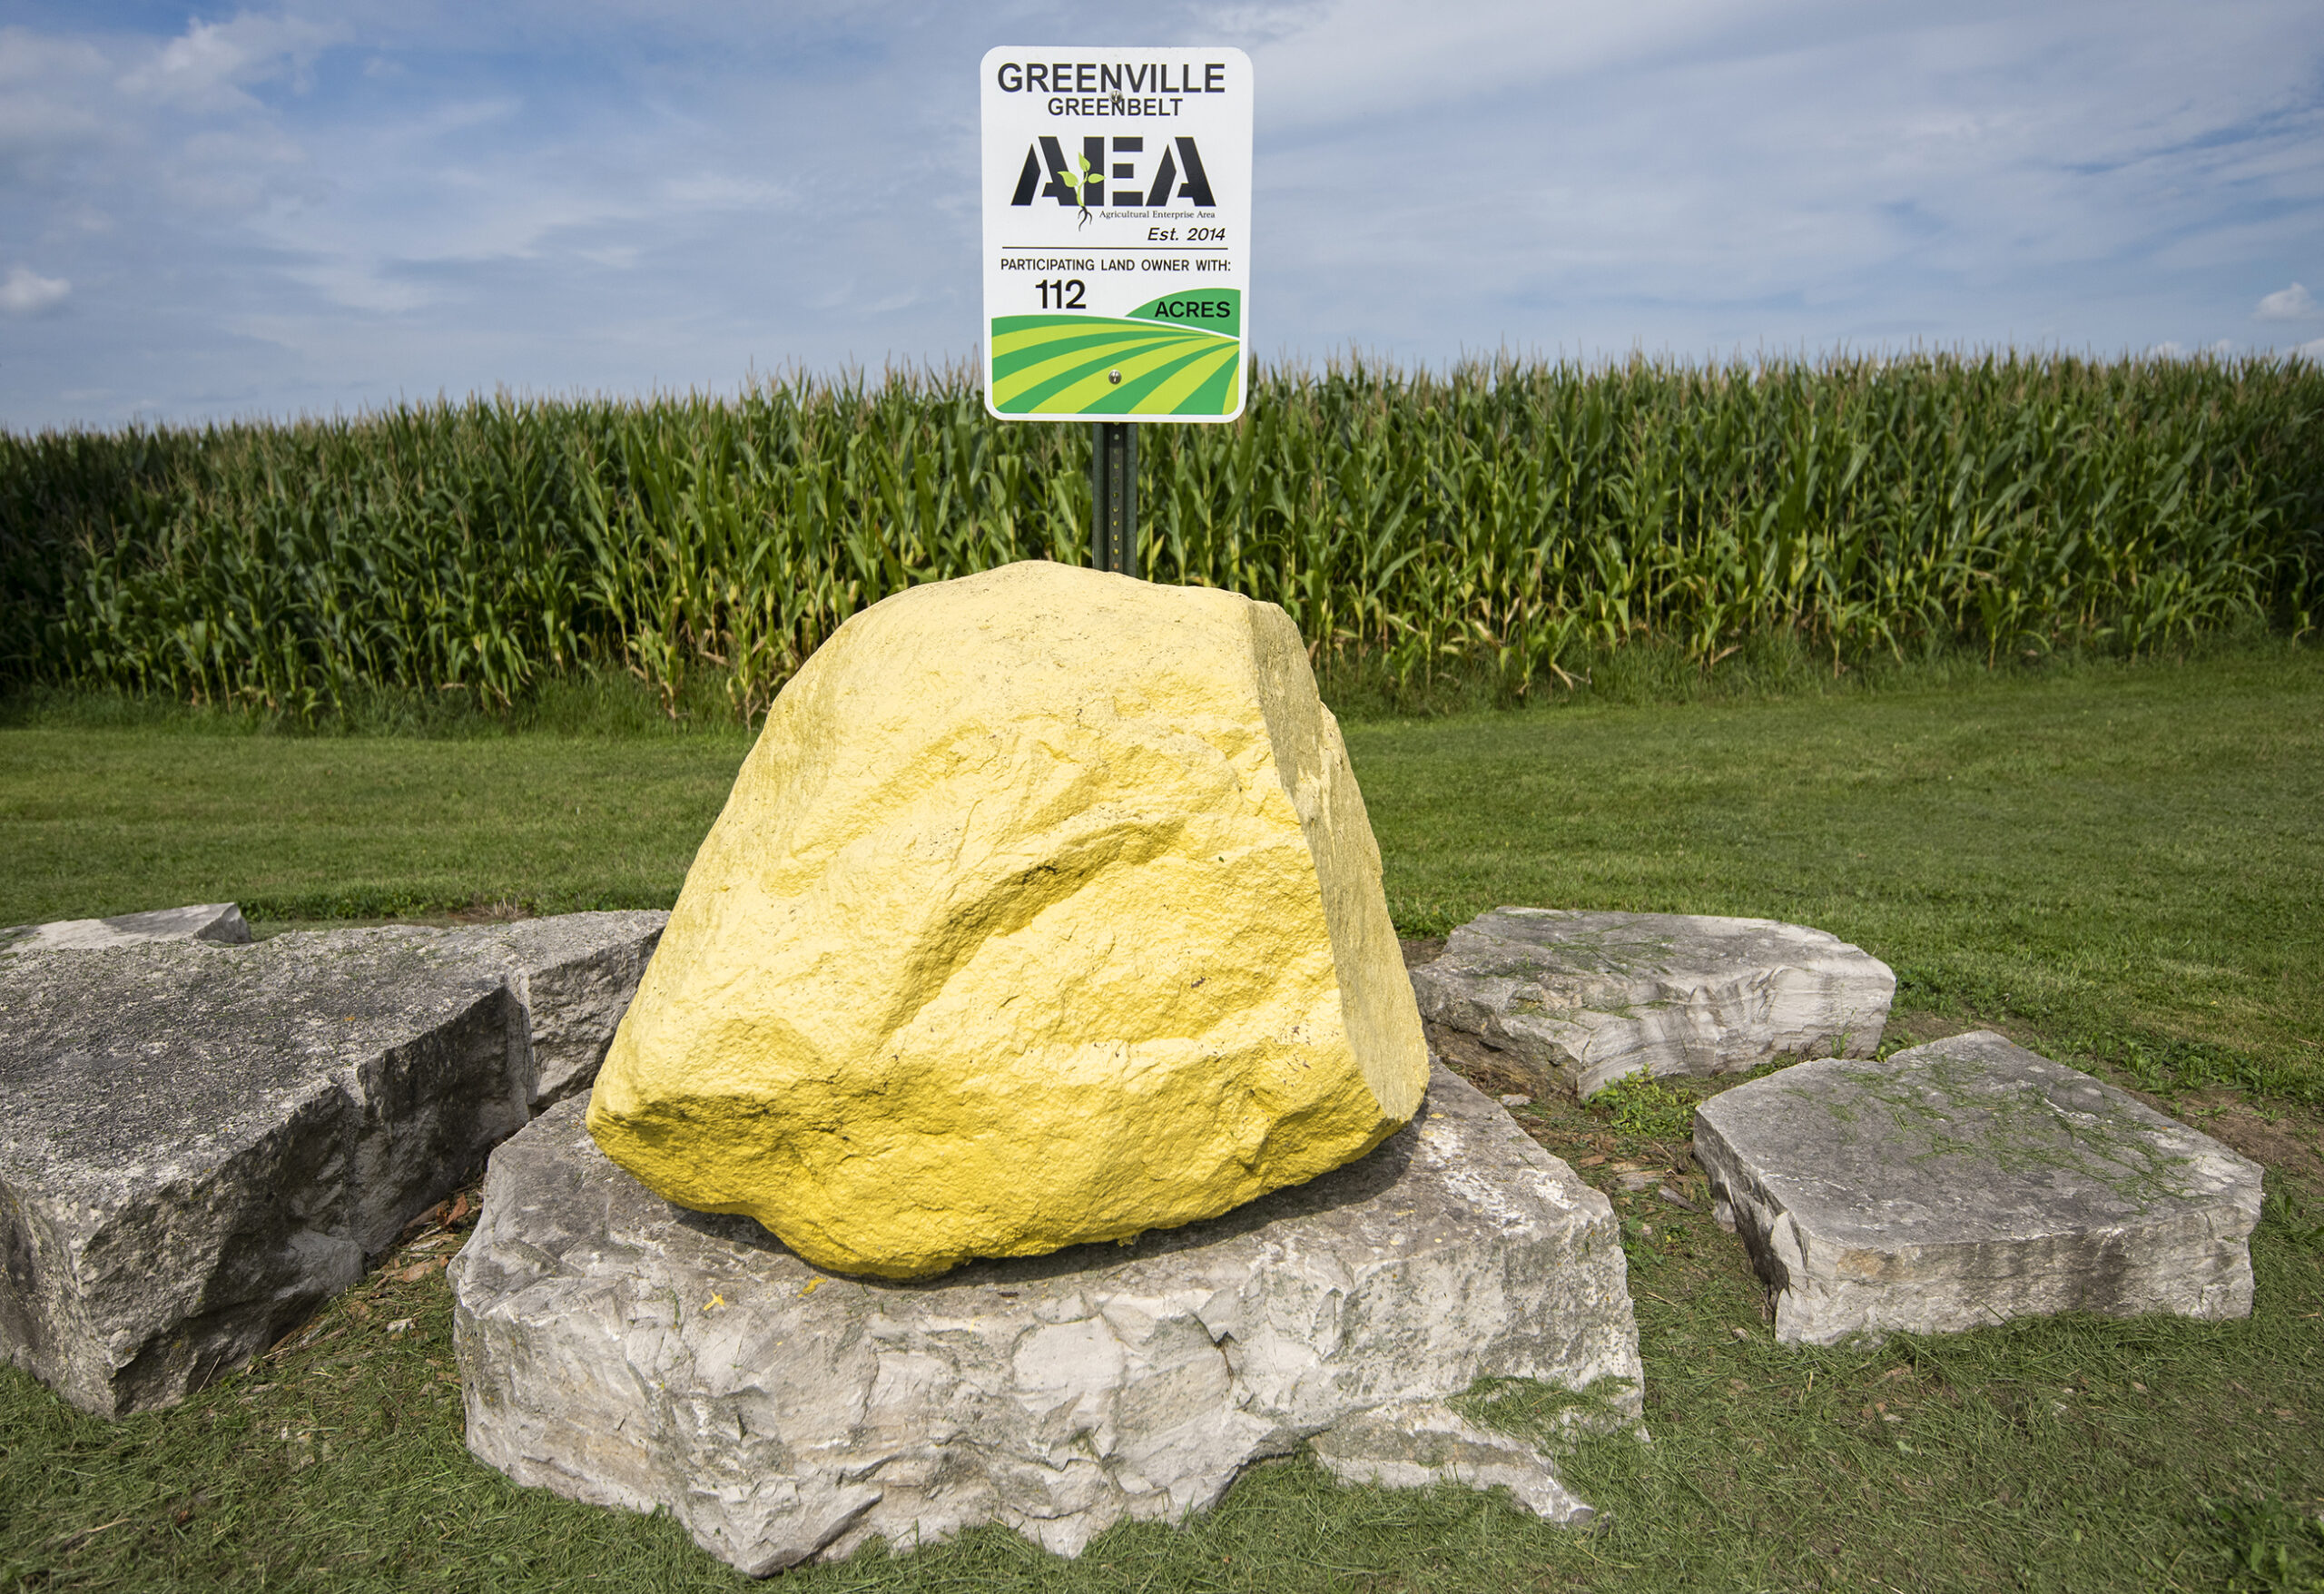 A large yellow boulder sits in front of a corn field